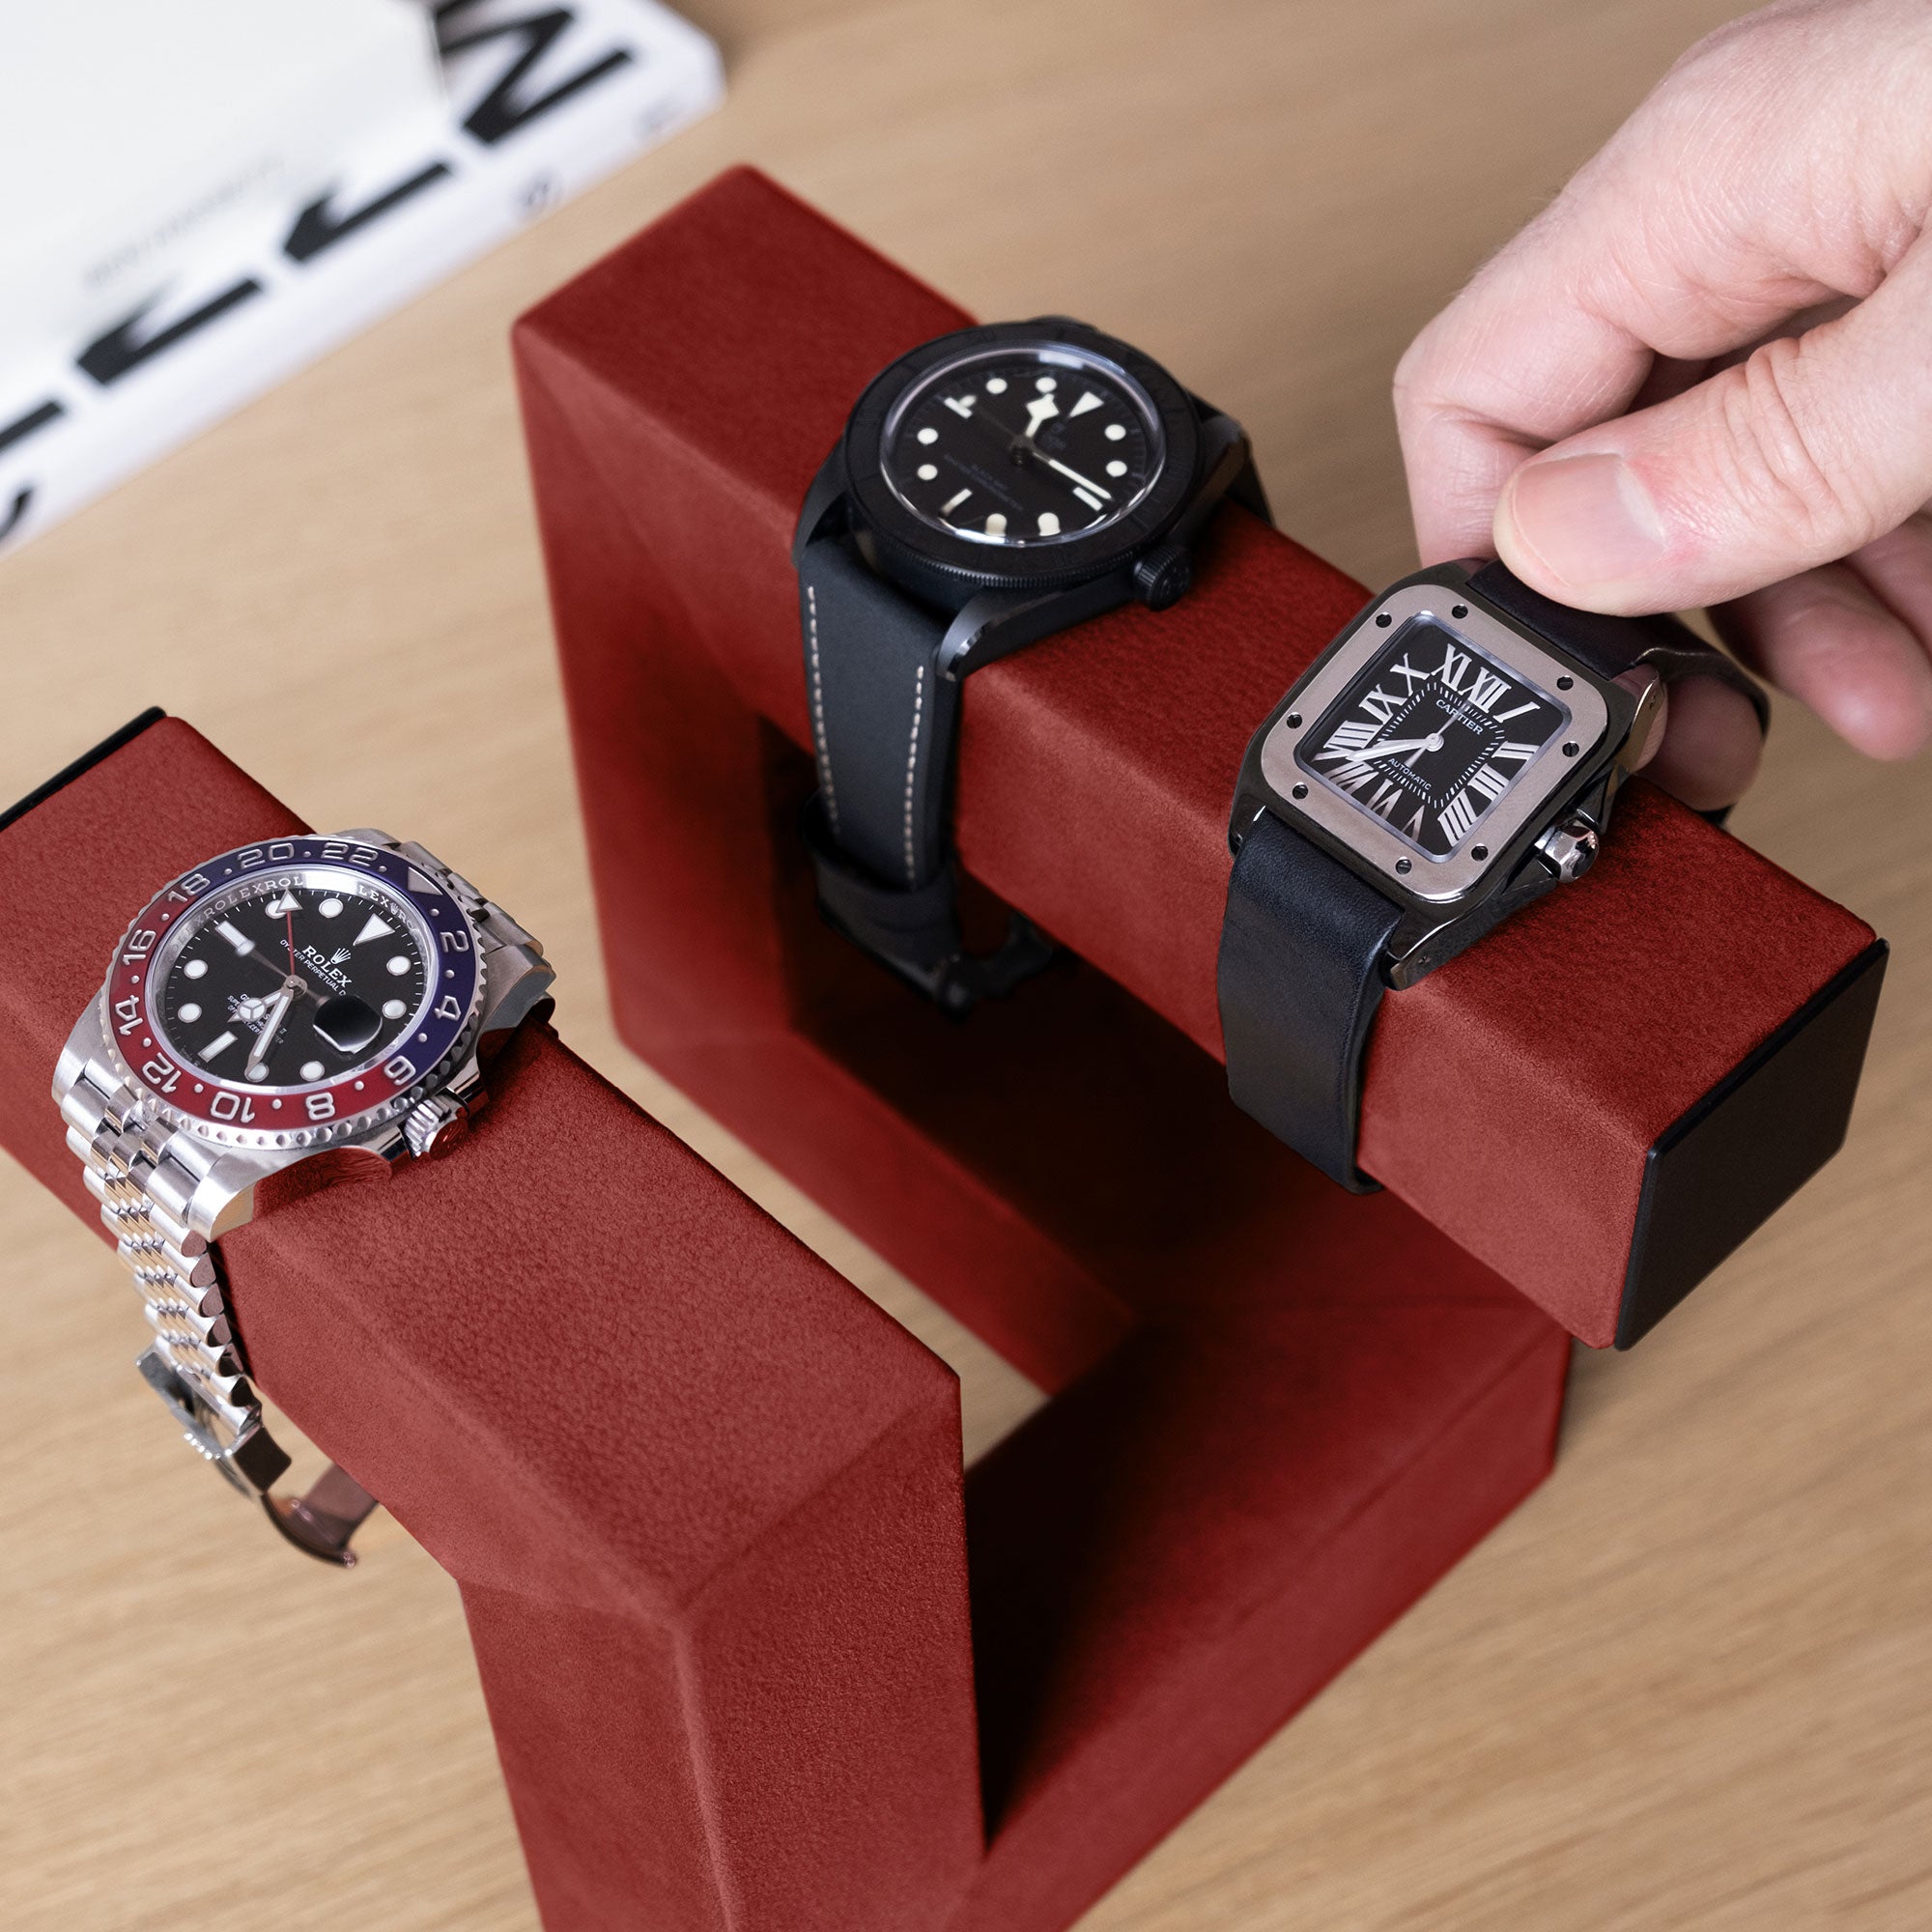 Lifestyle shot of 3 watches placed on crimson Hudson 3 designer watch stand